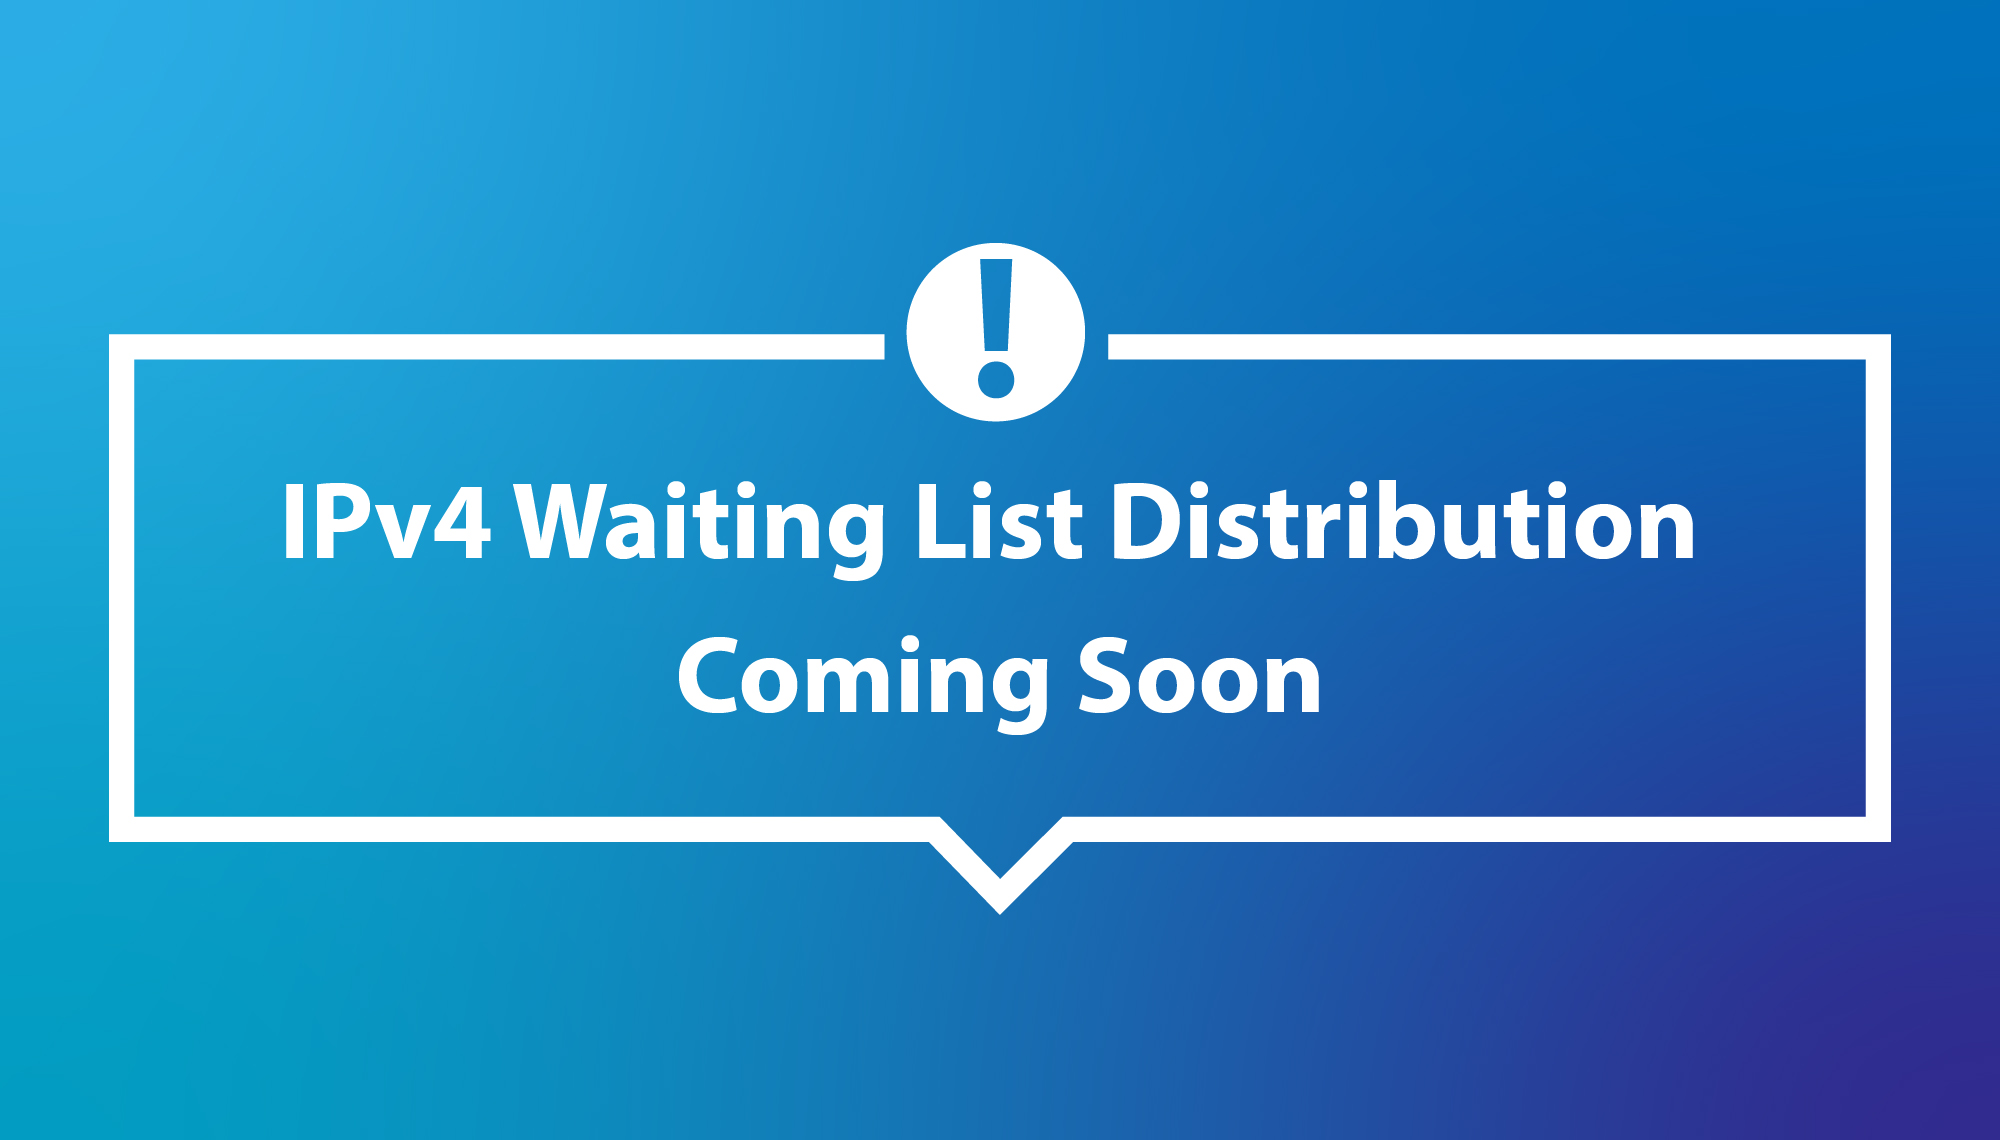 Next IPv4 Waiting List Distribution Coming This Month